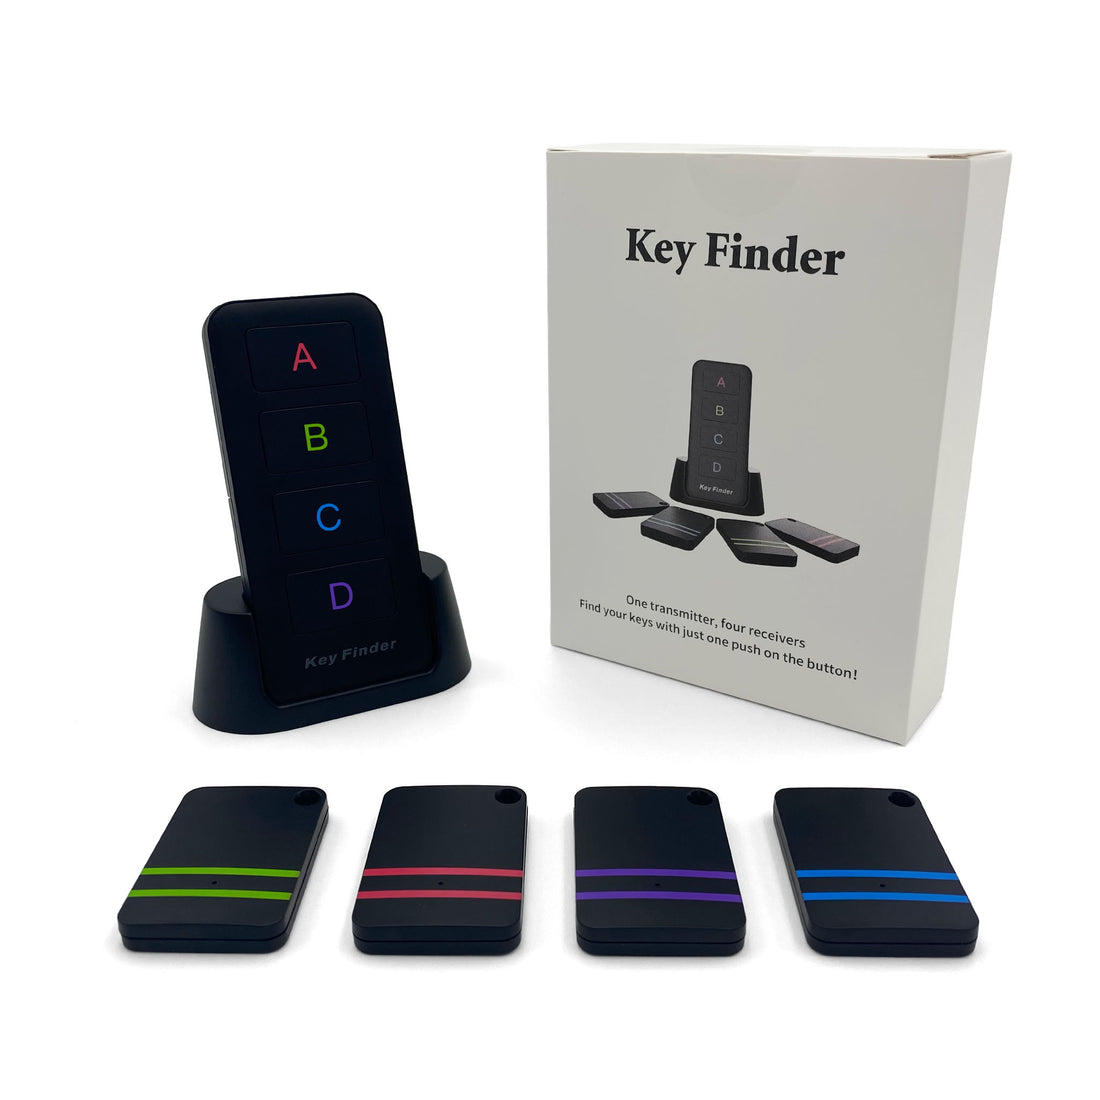 key finder set with four locators and one remote